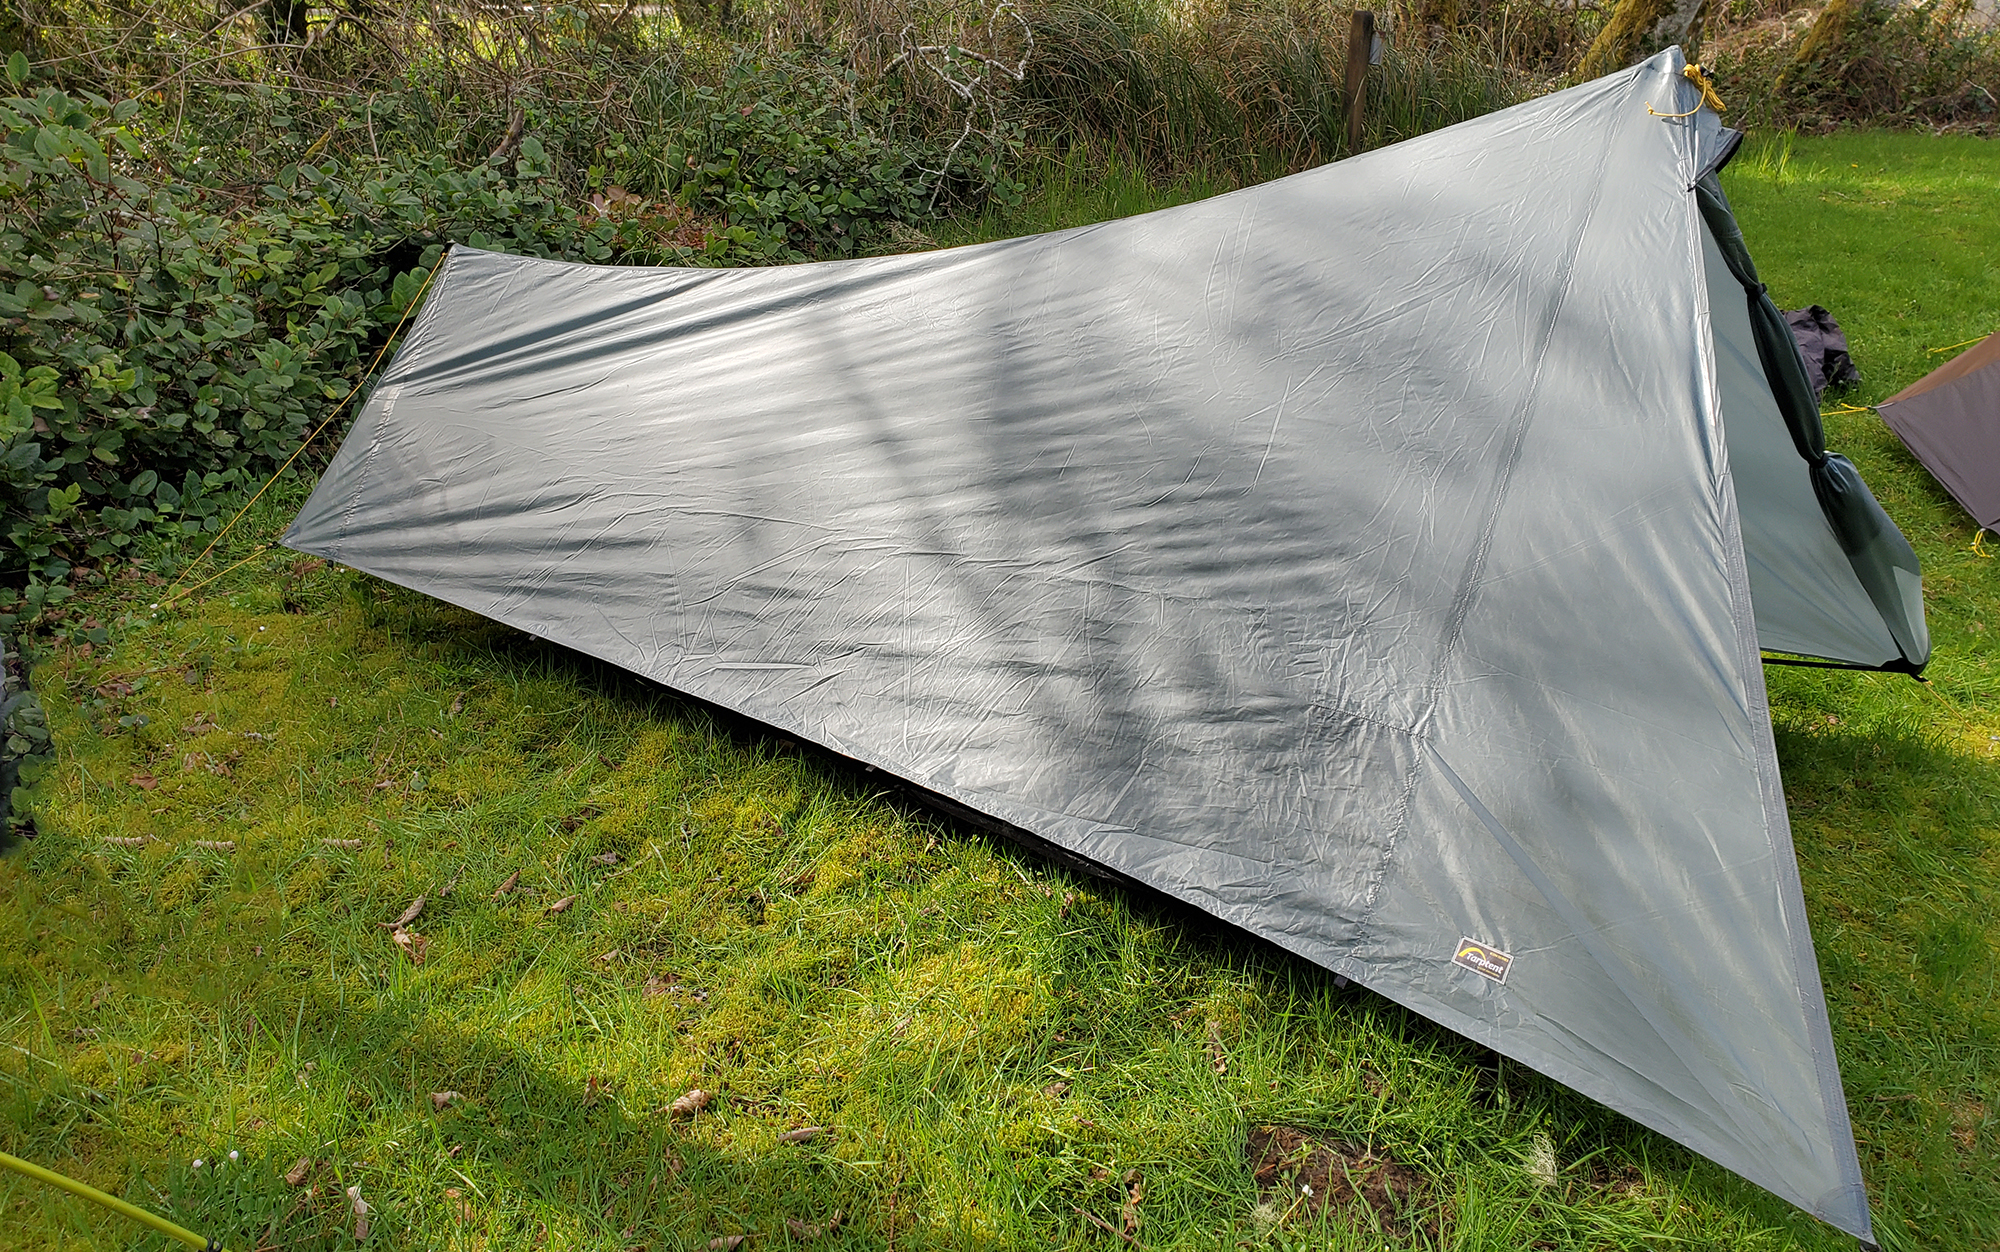 The Tarptent ProTrail is best for tall people.